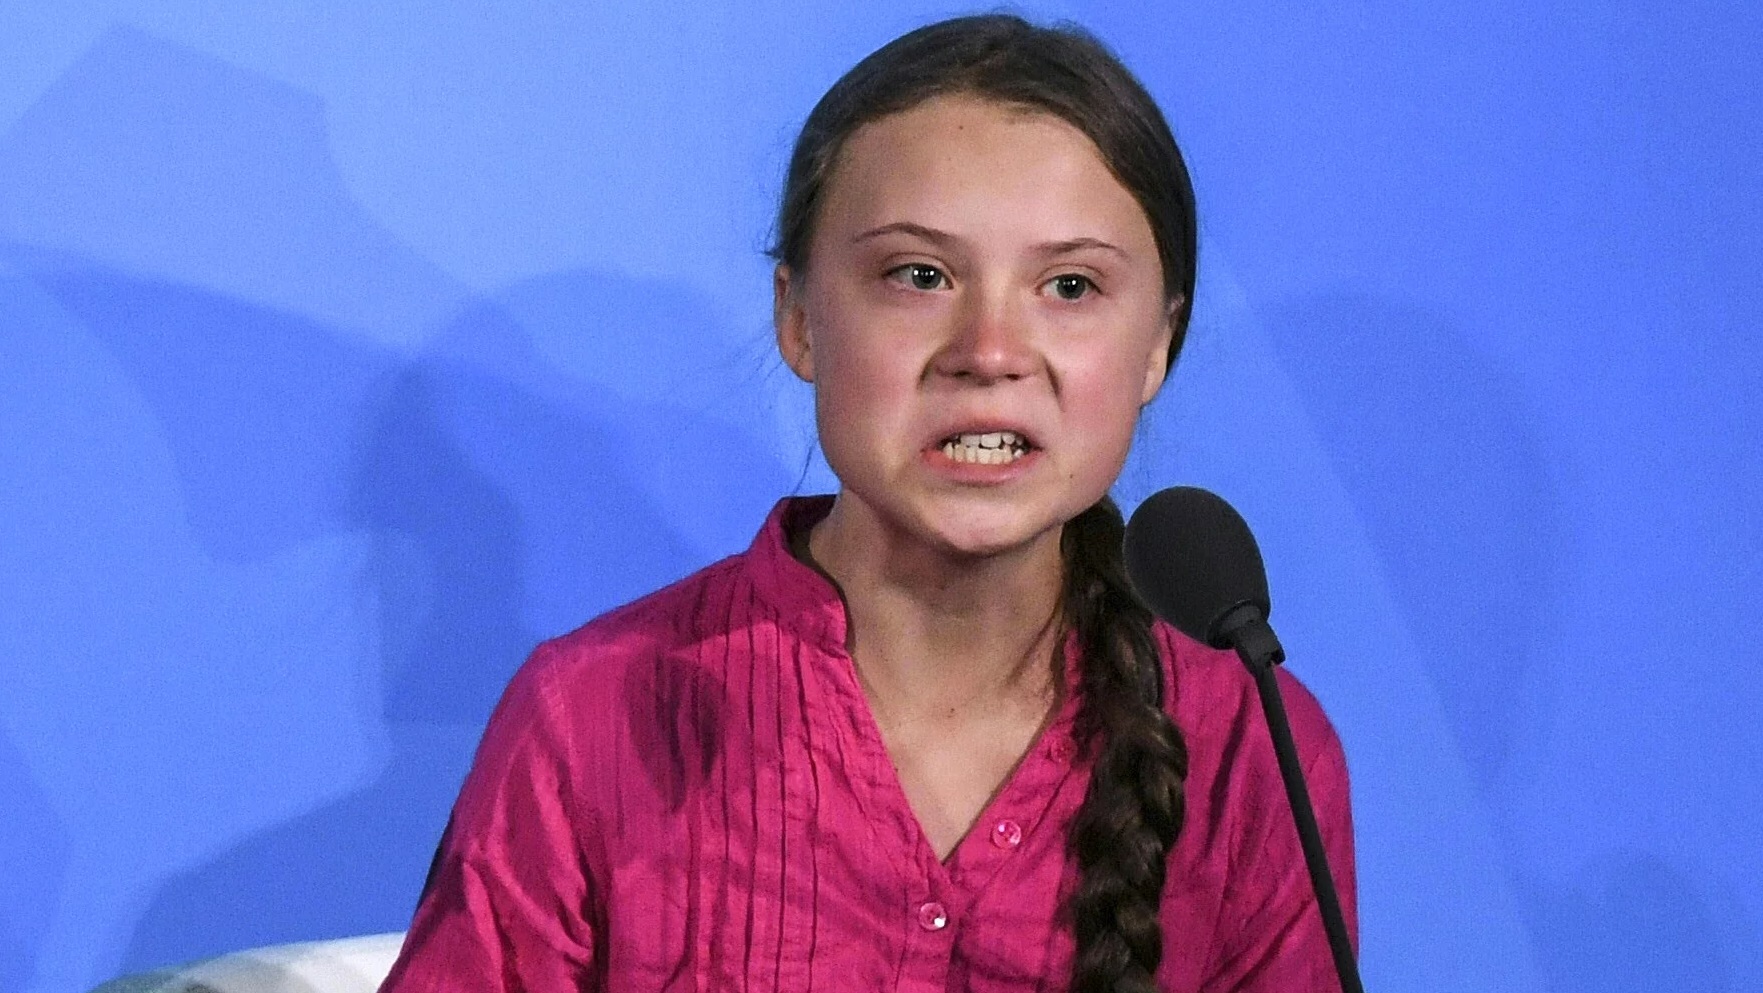 Did eco-fascist Greta Thunberg just call for the EXECUTIONS of world leaders who don’t comply with her climate change demands?